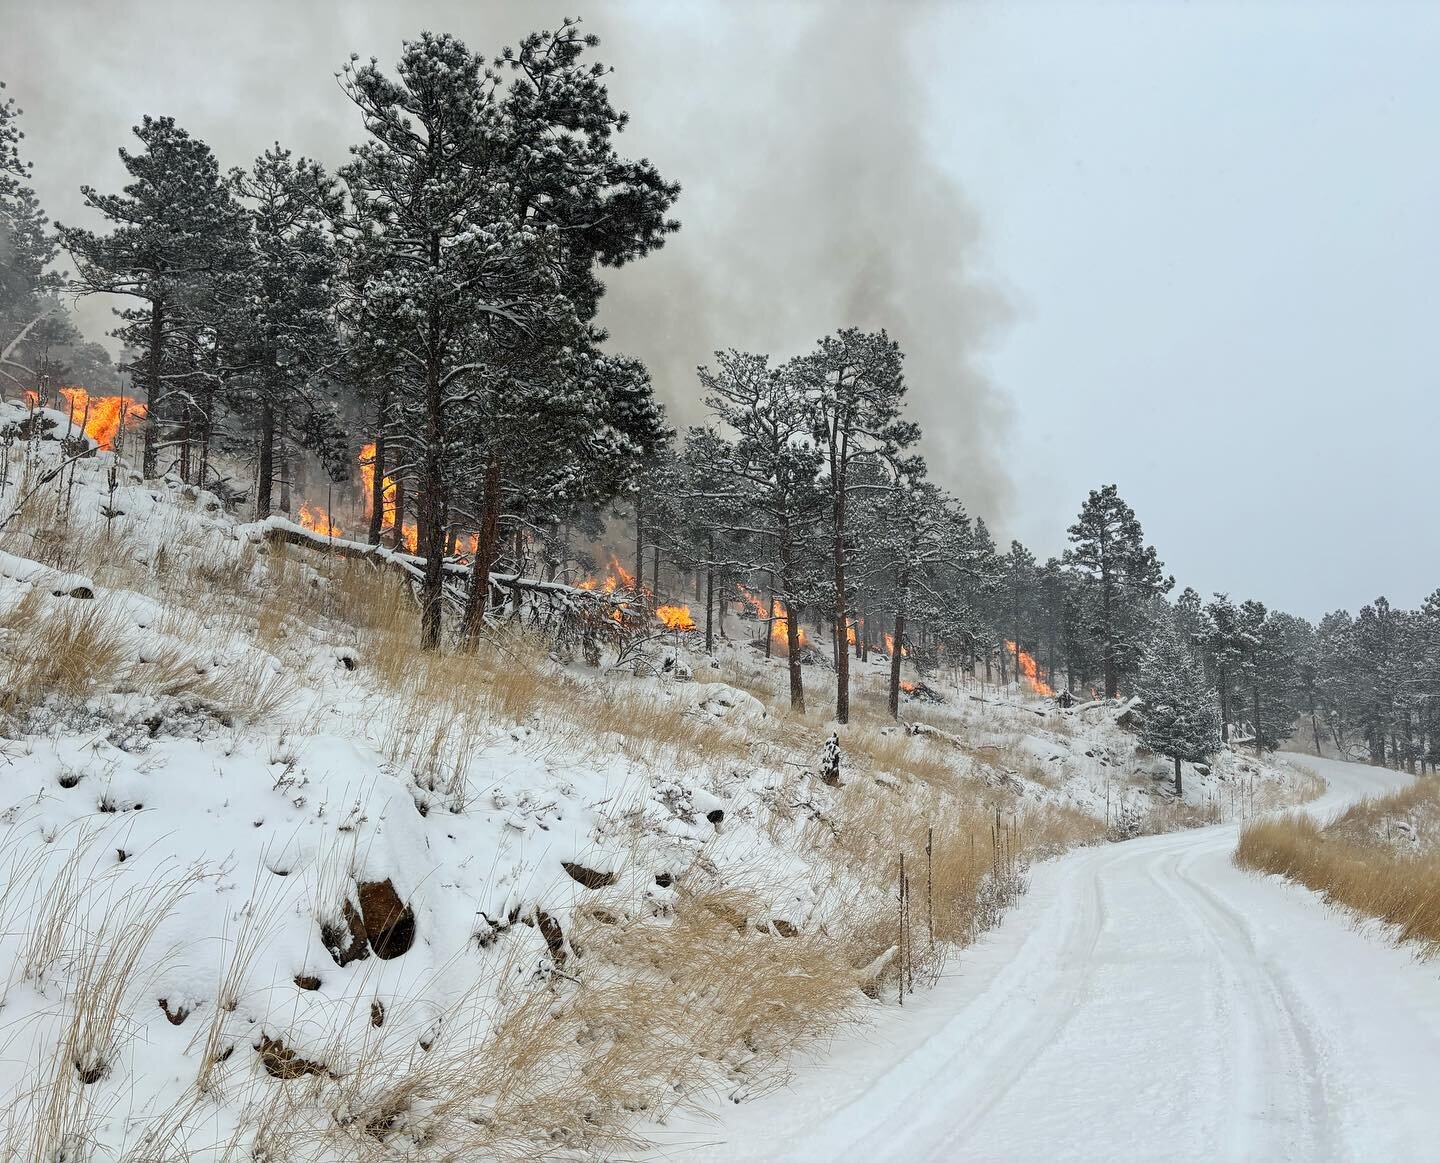 Another day, another burn update! The Crew is back to Sunshine Canyon to burn 20 piles on Eagles Drive. Smoke and flames may be visible in the area, but the piles are contained and will be staffed through this afternoon. A 24 hour check will be condu